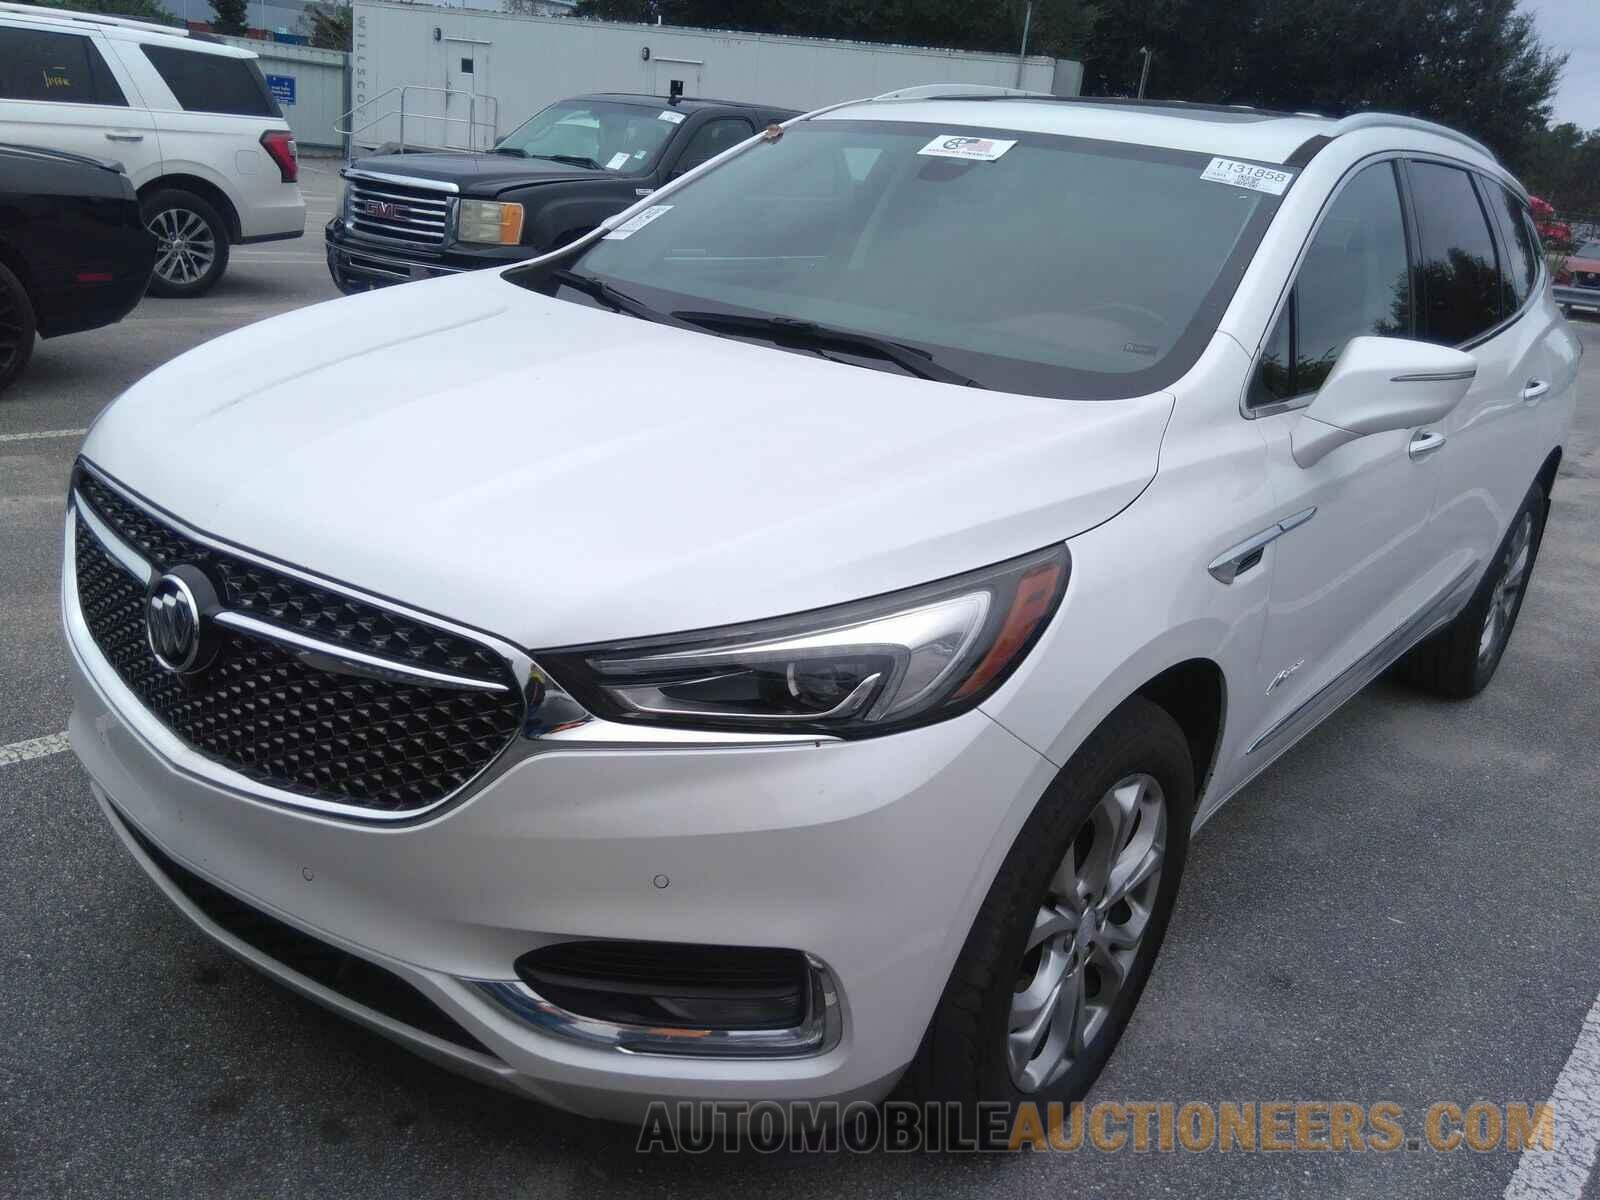 5GAEVCKW6JJ162996 Buick Enclave 2018